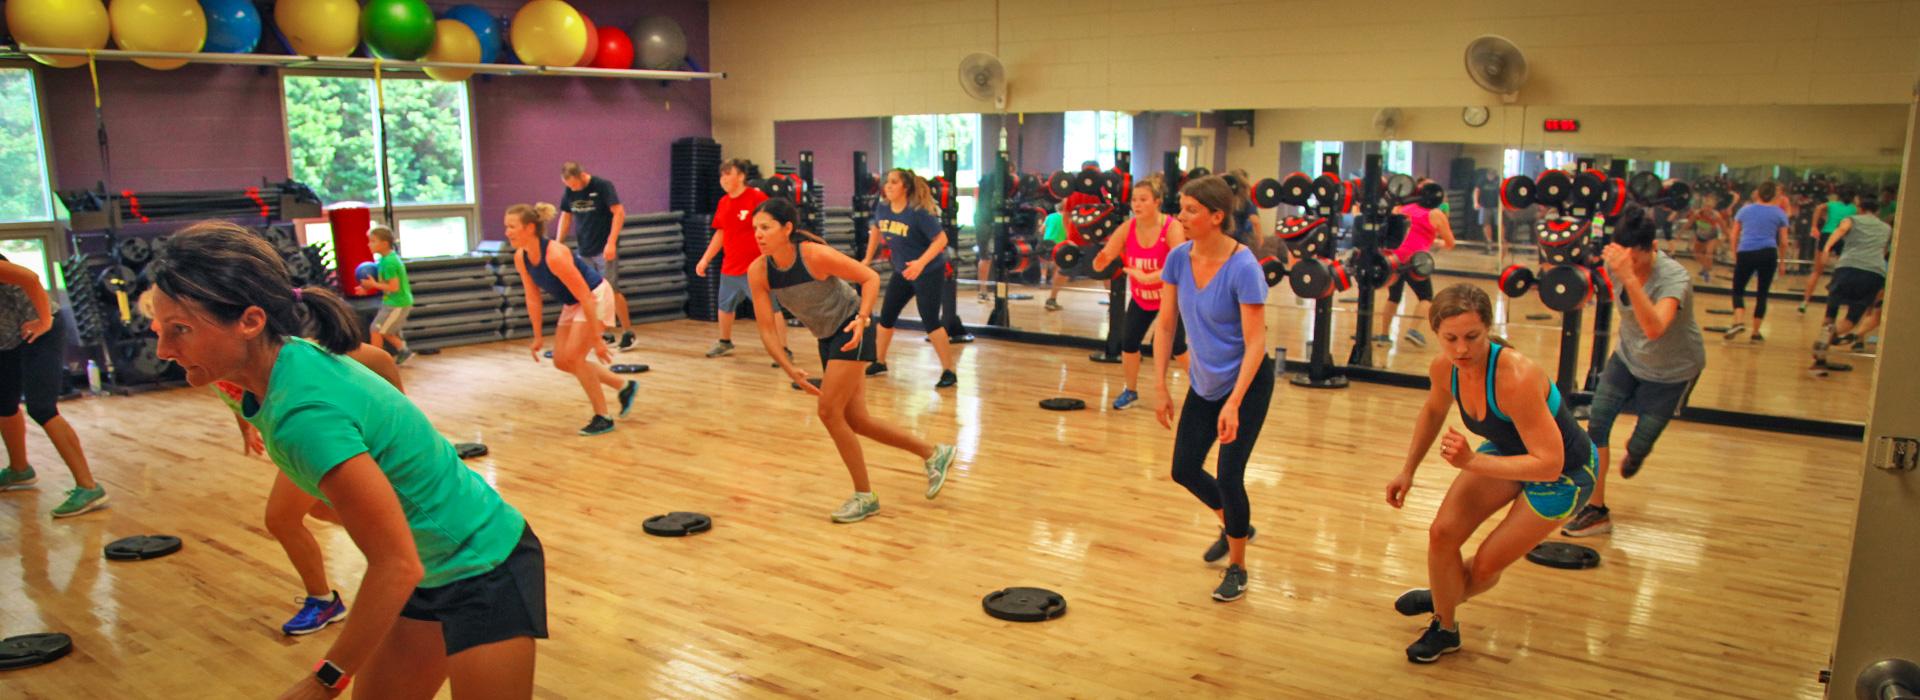 YMCA members working out in fitness class at the Hilltop Family YMCA